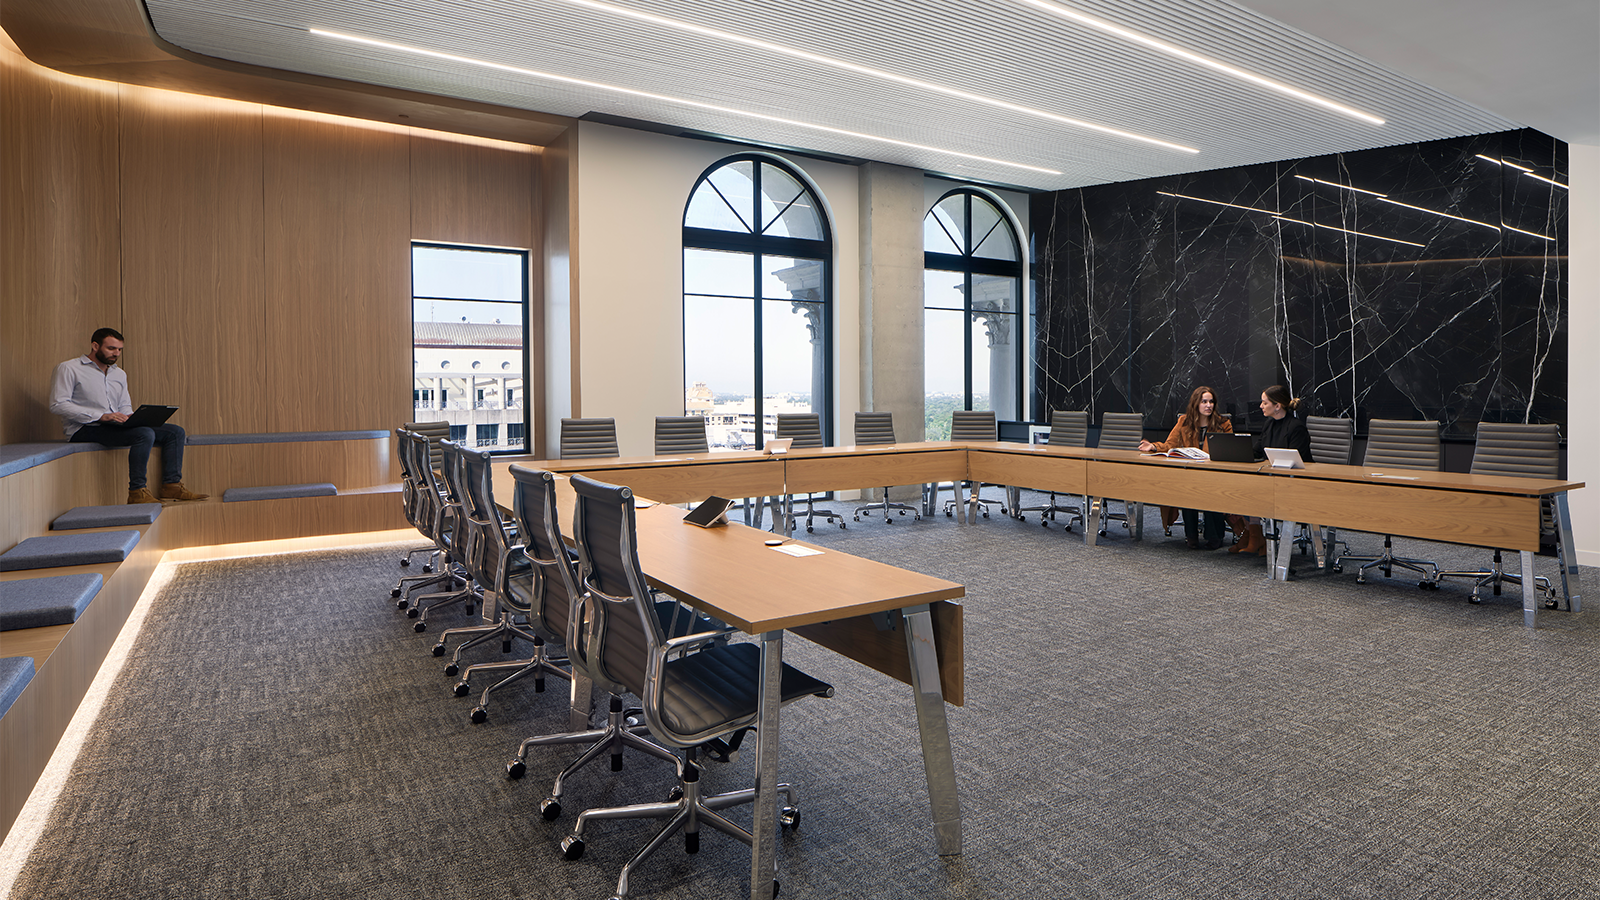 A flexible office training and meeting space in ACI Worldwide's Miami headquarters